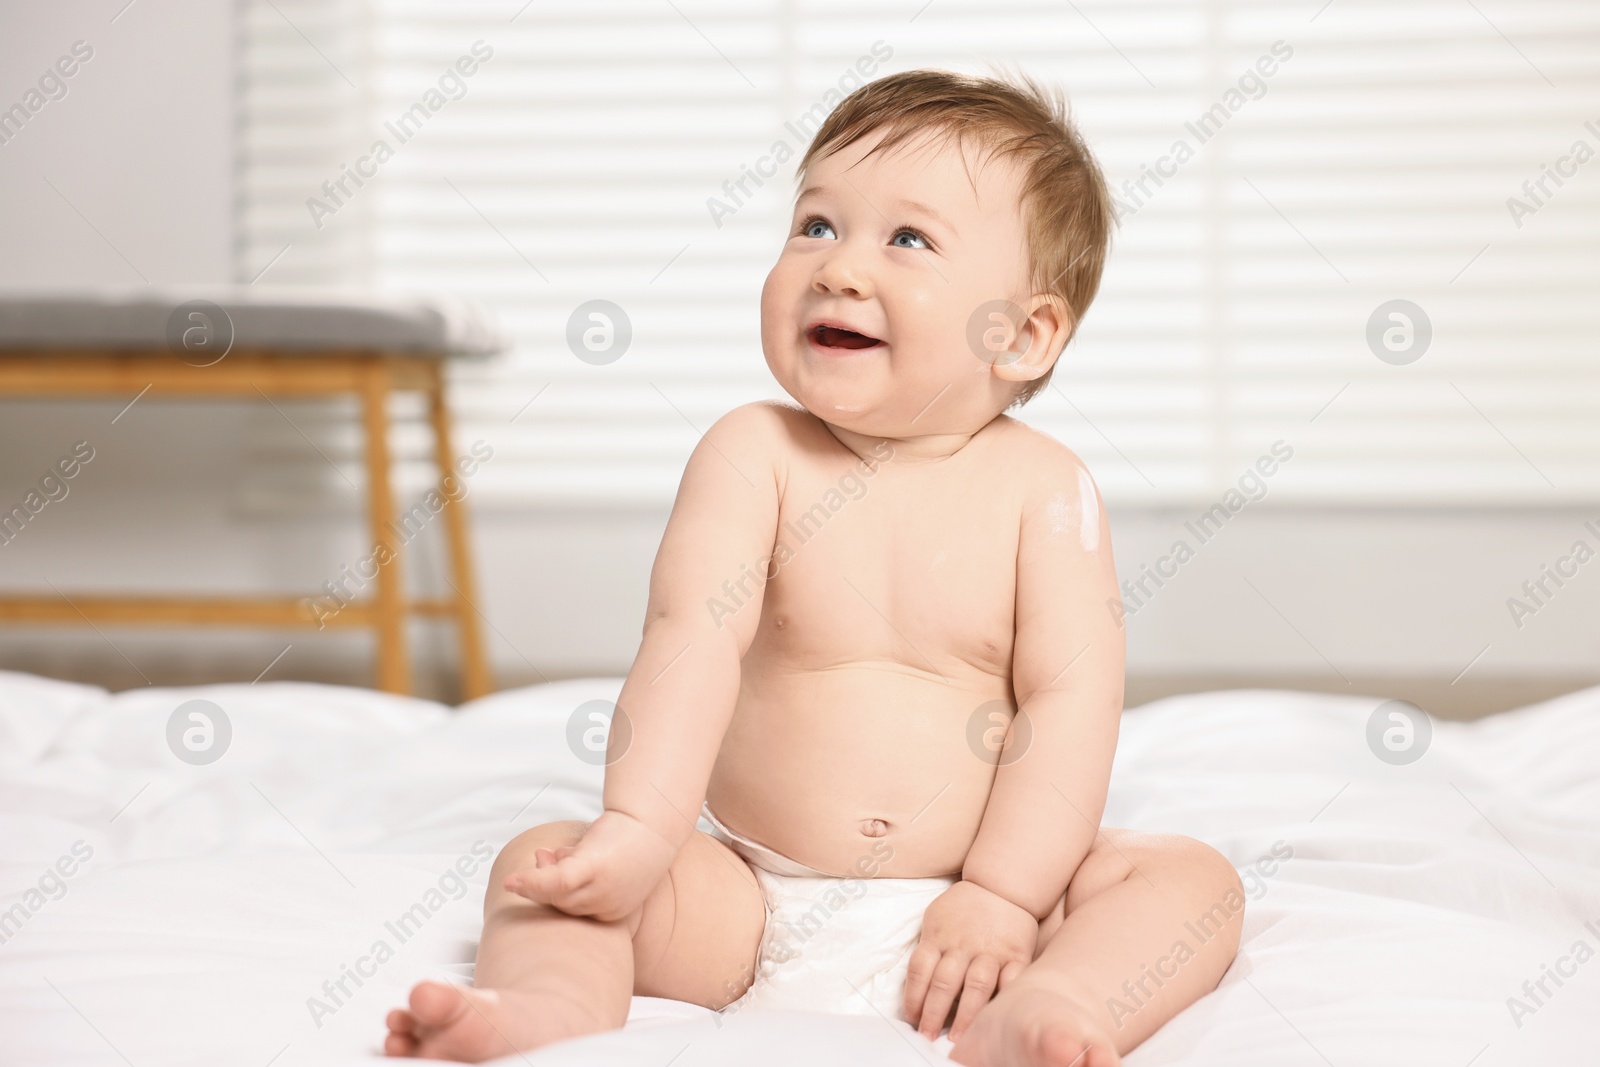 Photo of Cute little baby with moisturizing cream on body sitting on bed at home